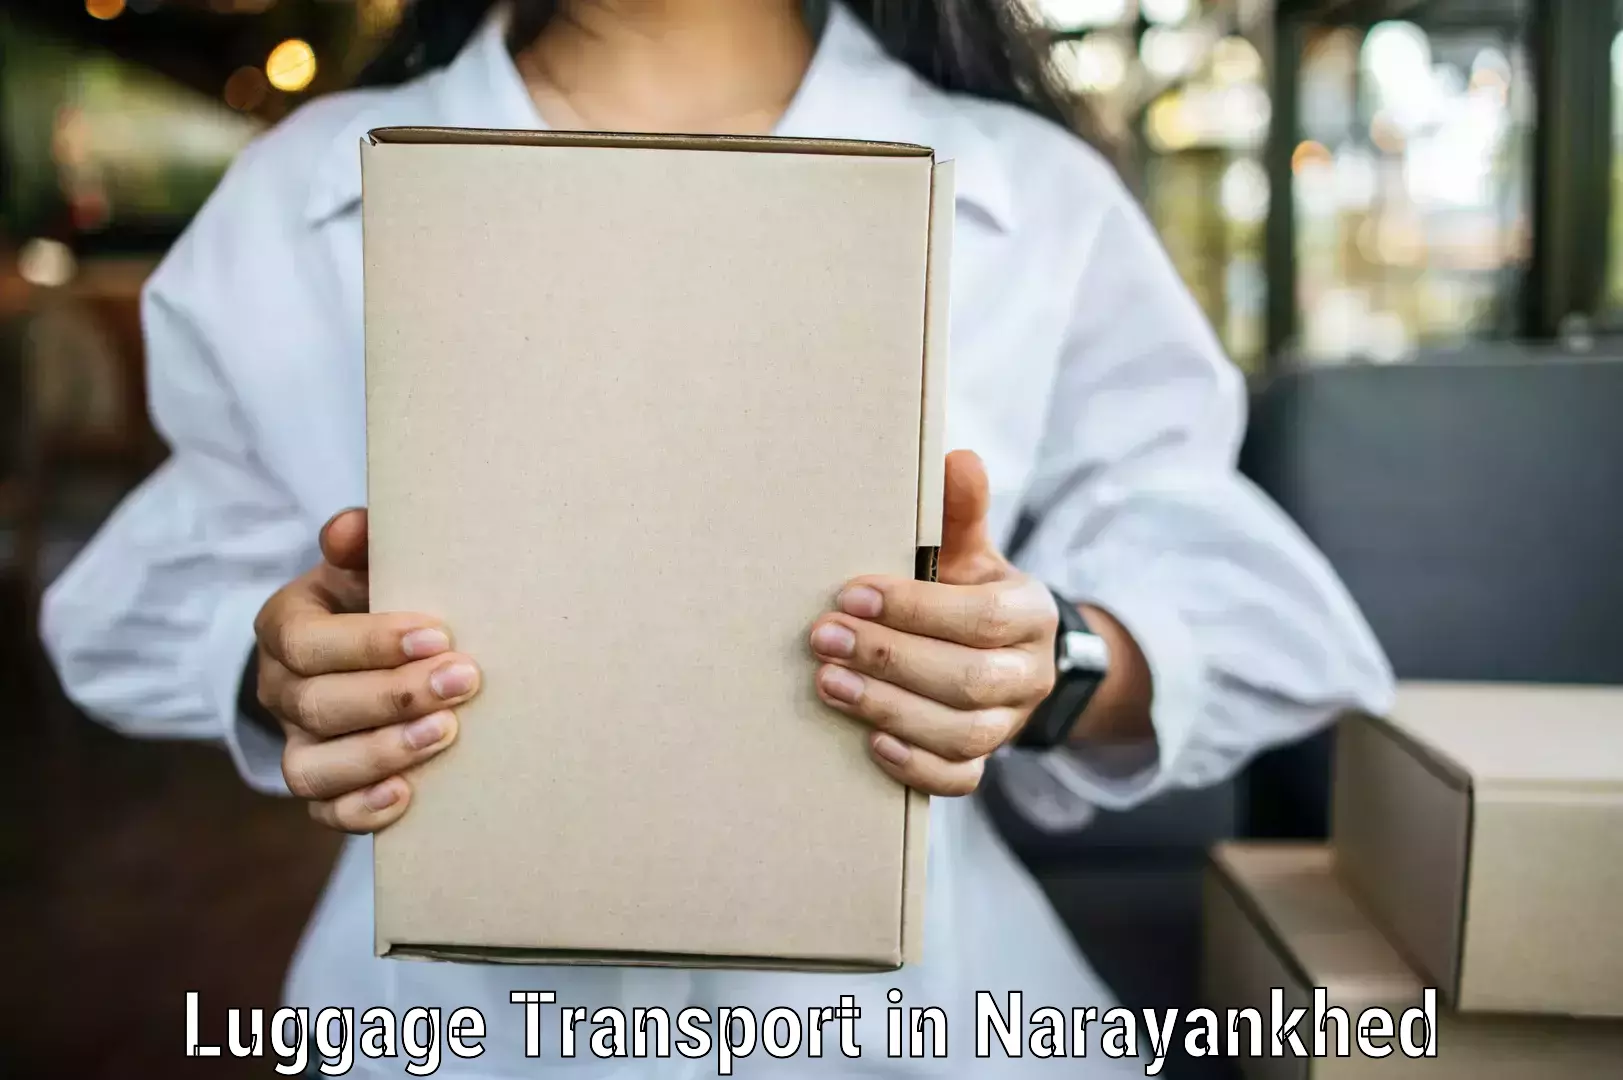 Luggage dispatch service in Narayankhed